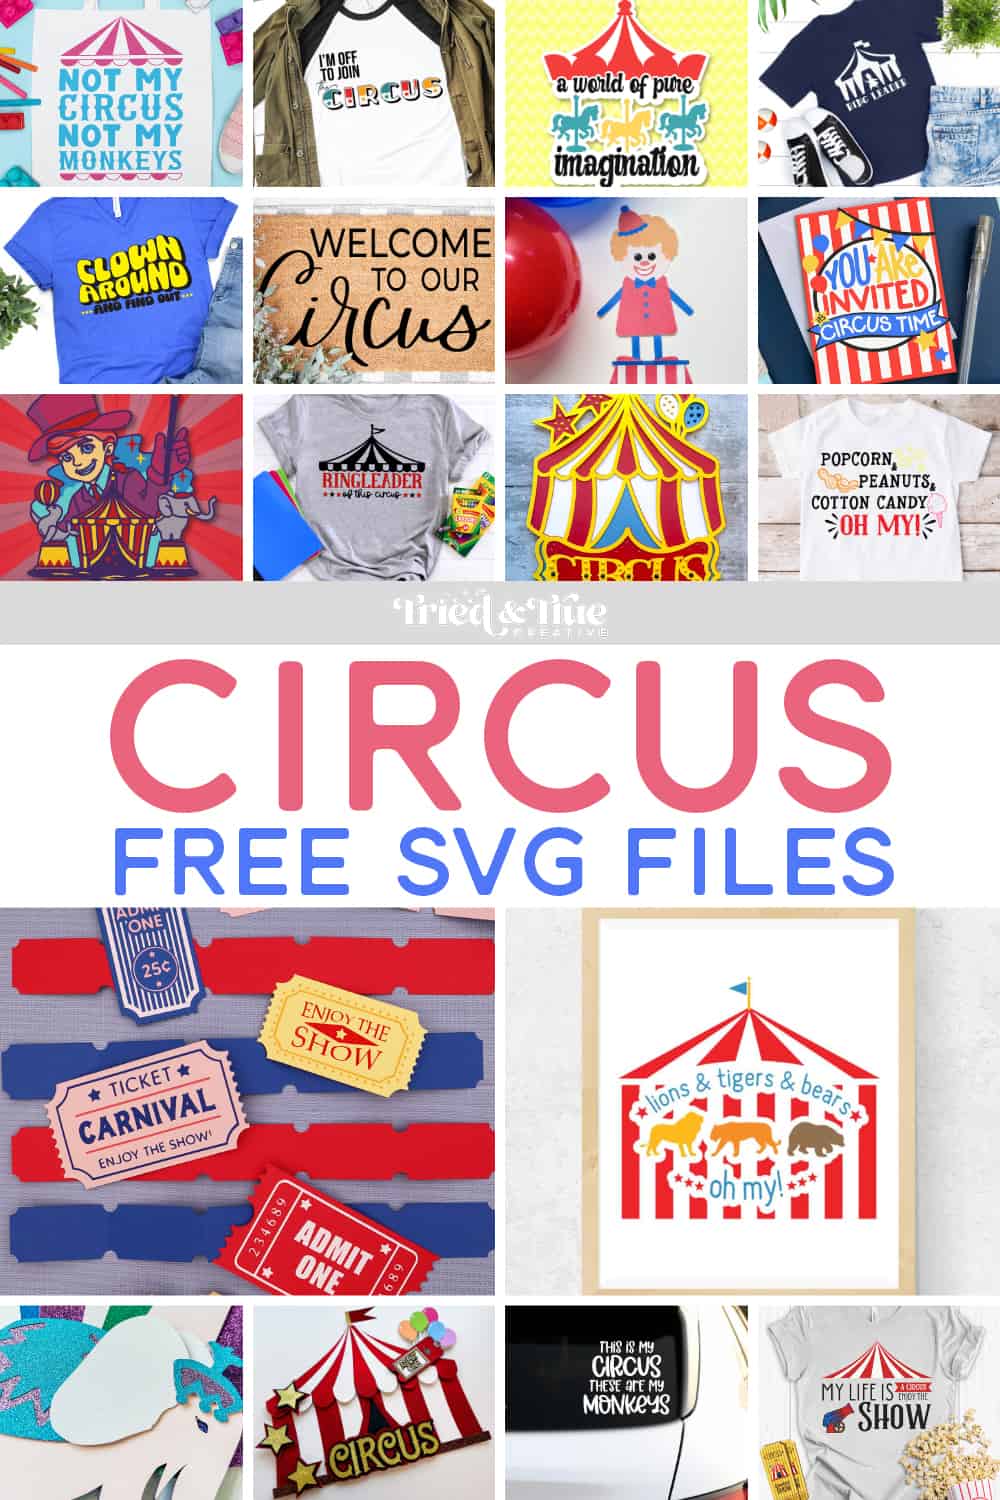 Collage of circus free svg files.